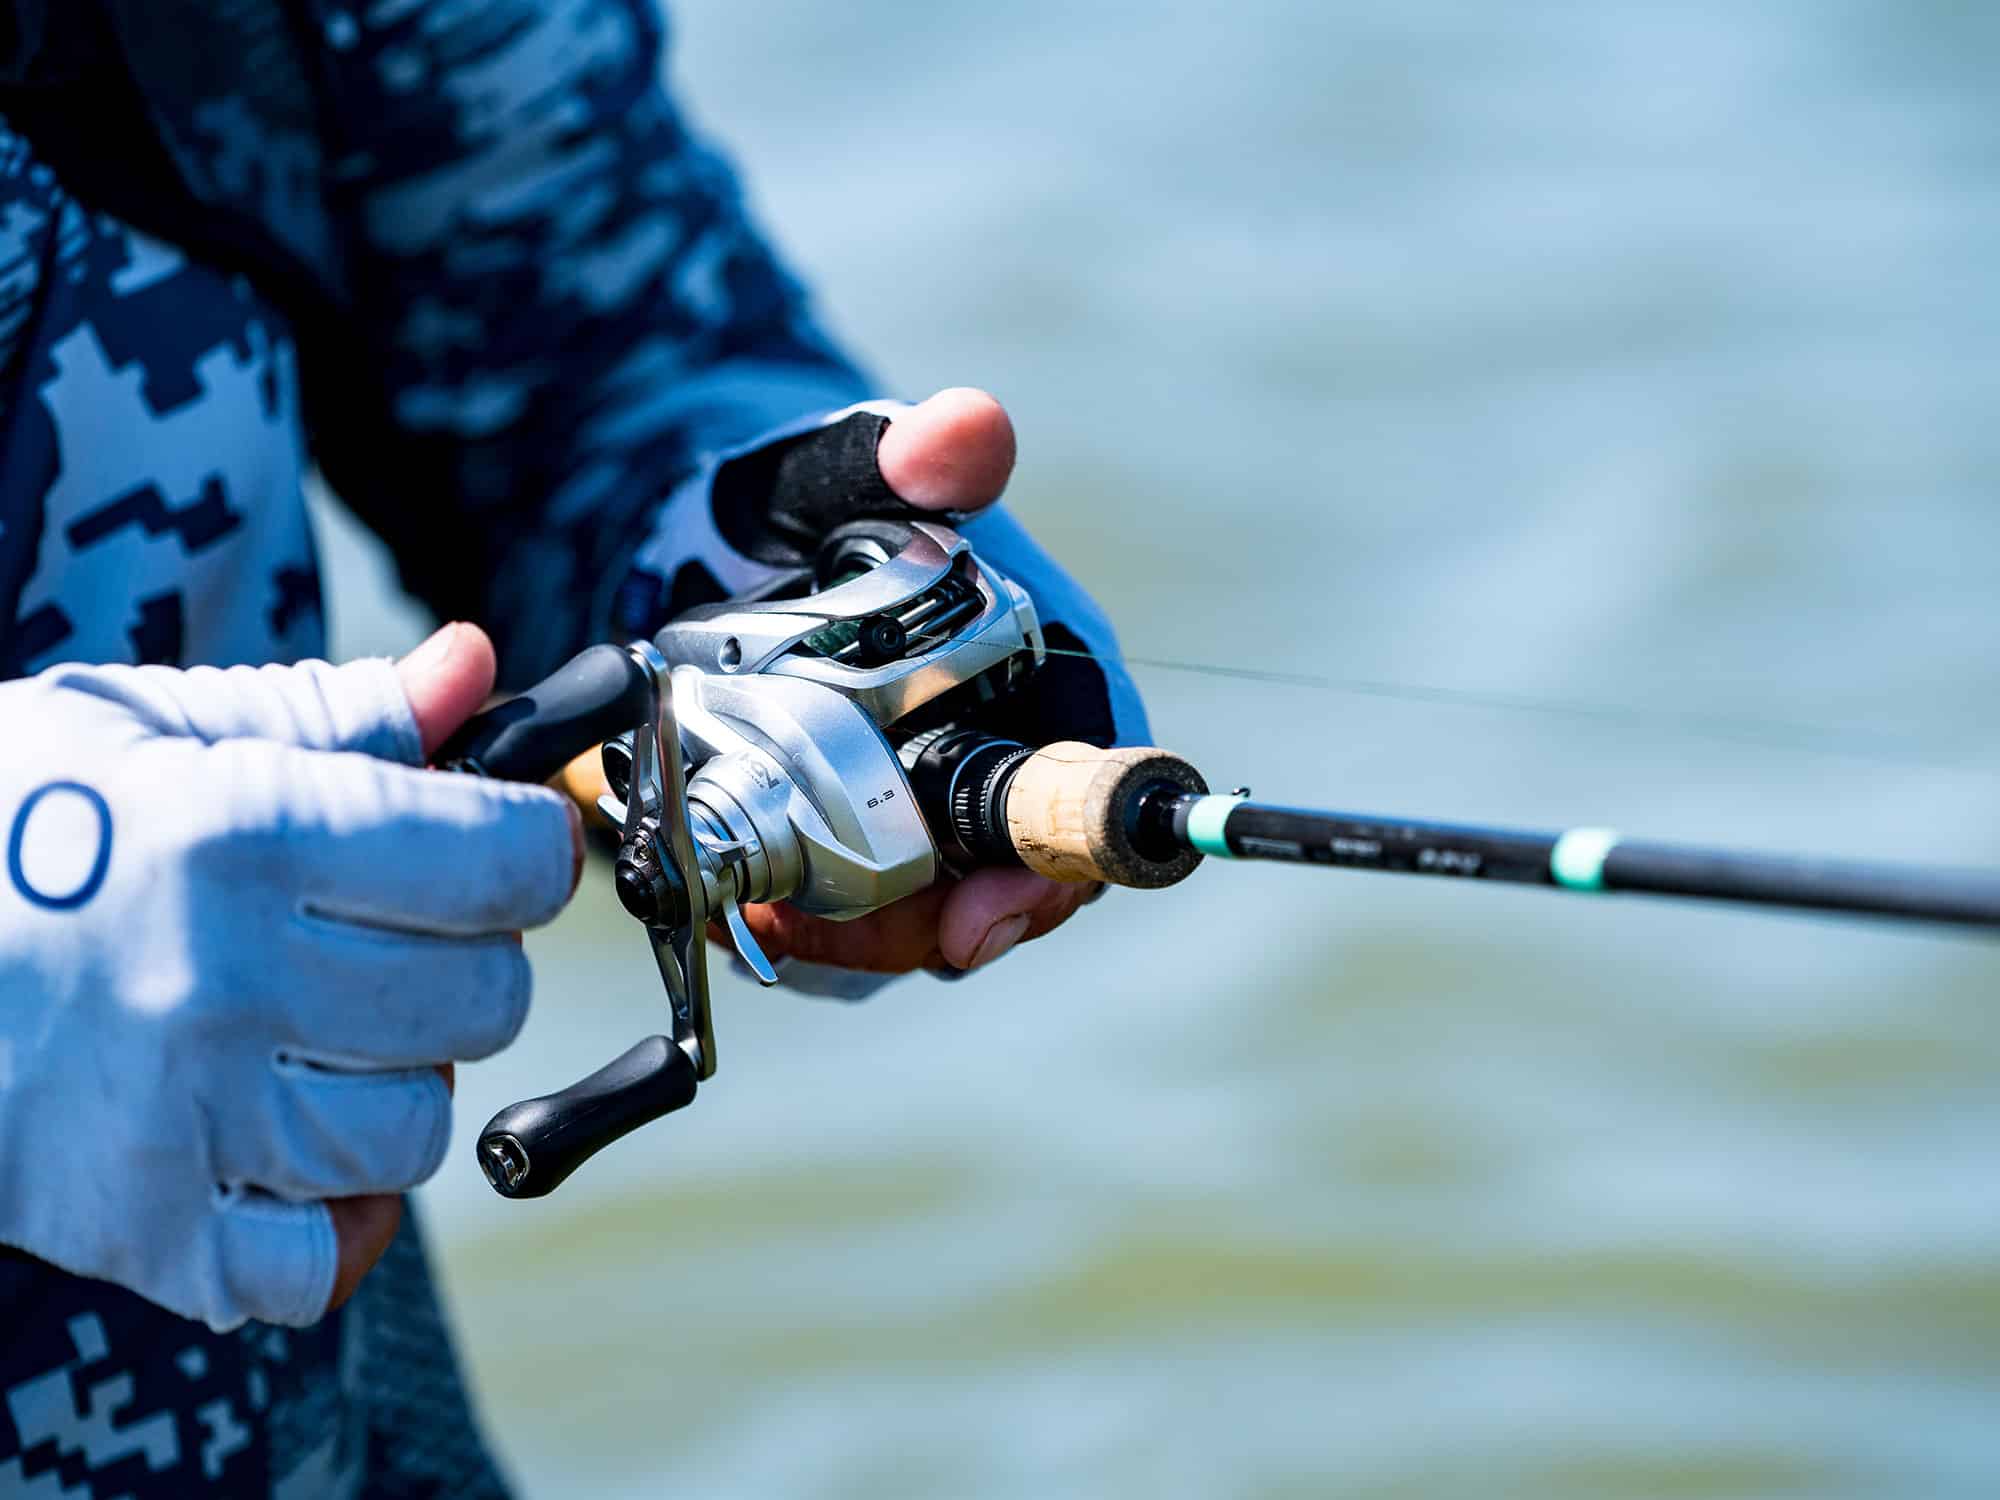 How to Cast a Fishing Rod: Ultimate Guide For Beginners – Daiwa